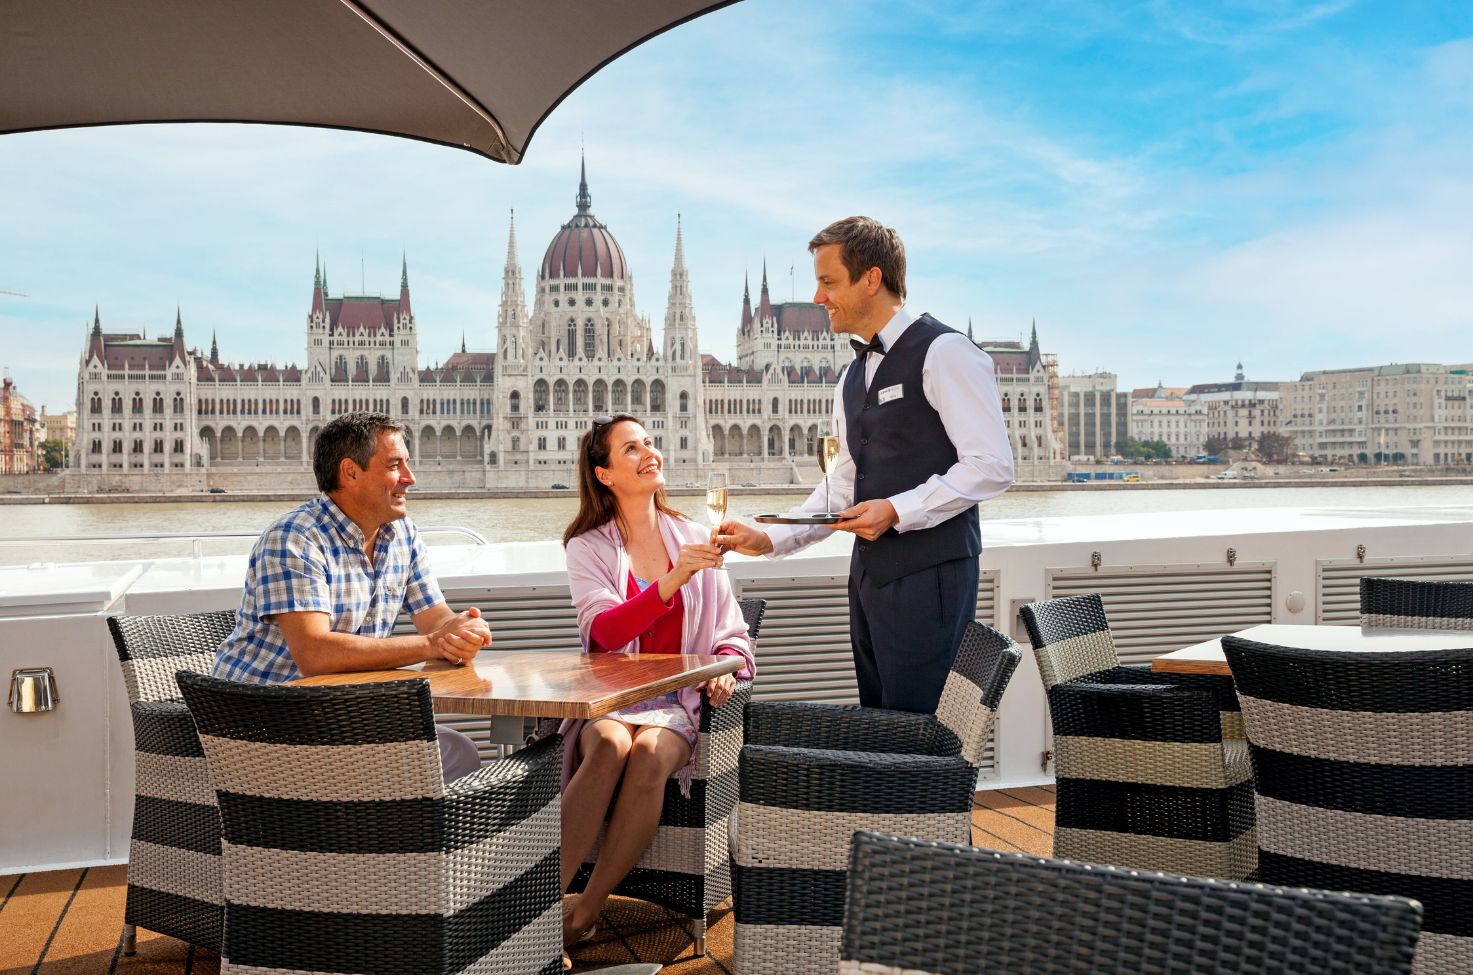 Butler serving a couple at a table on the roof of a river cruise ship with the Budapest Parliament Building in the background